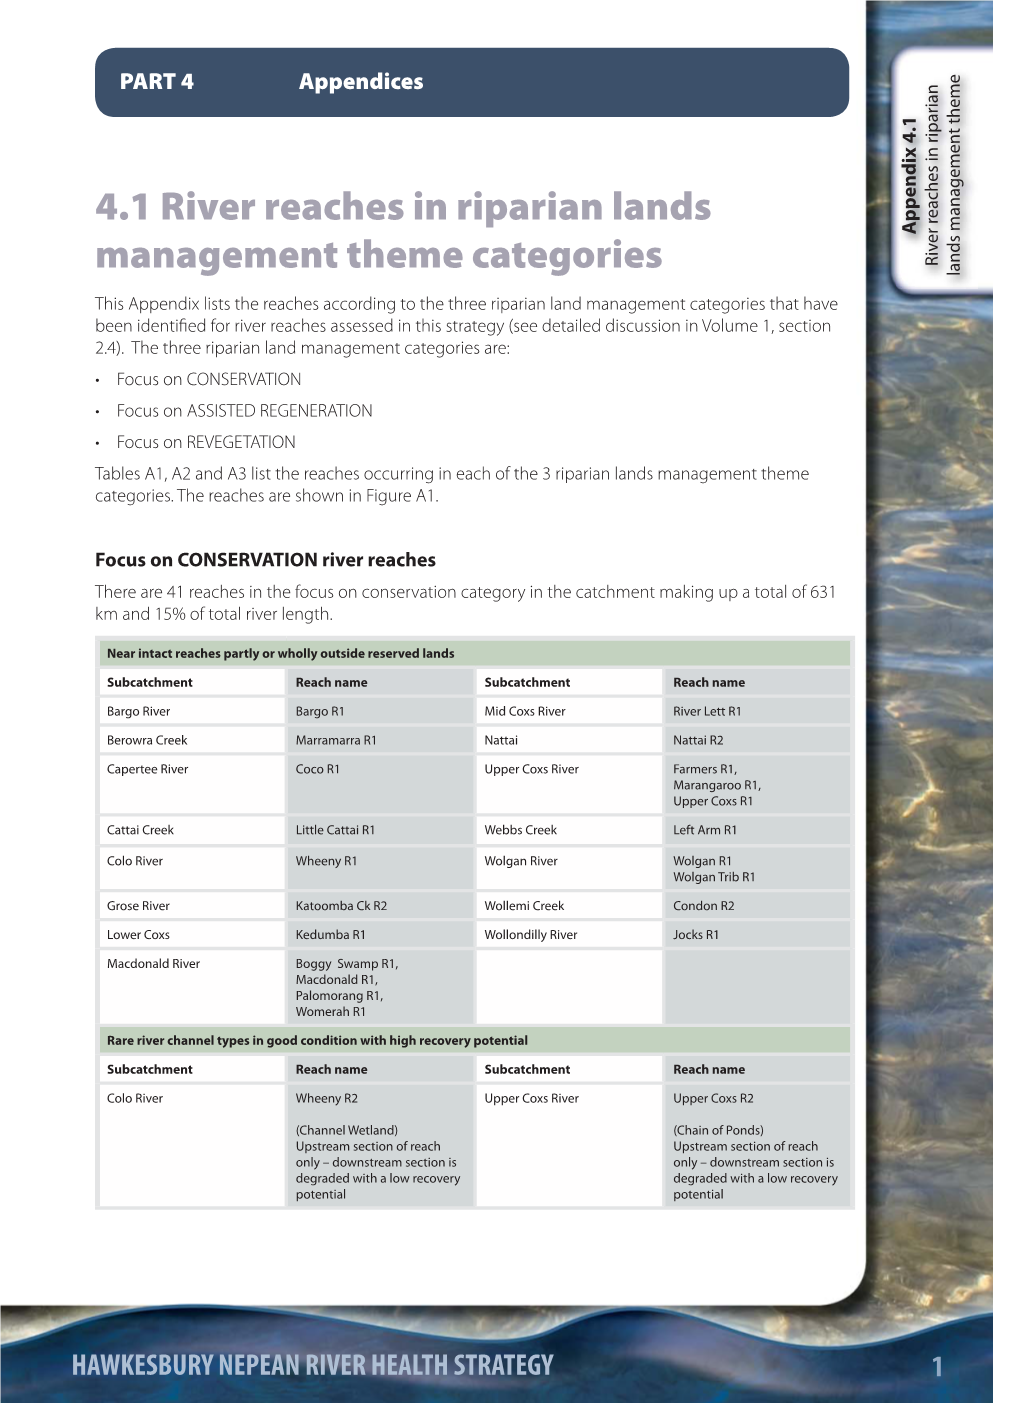 Hawkesbury Nepean River Health Strategy Appendices